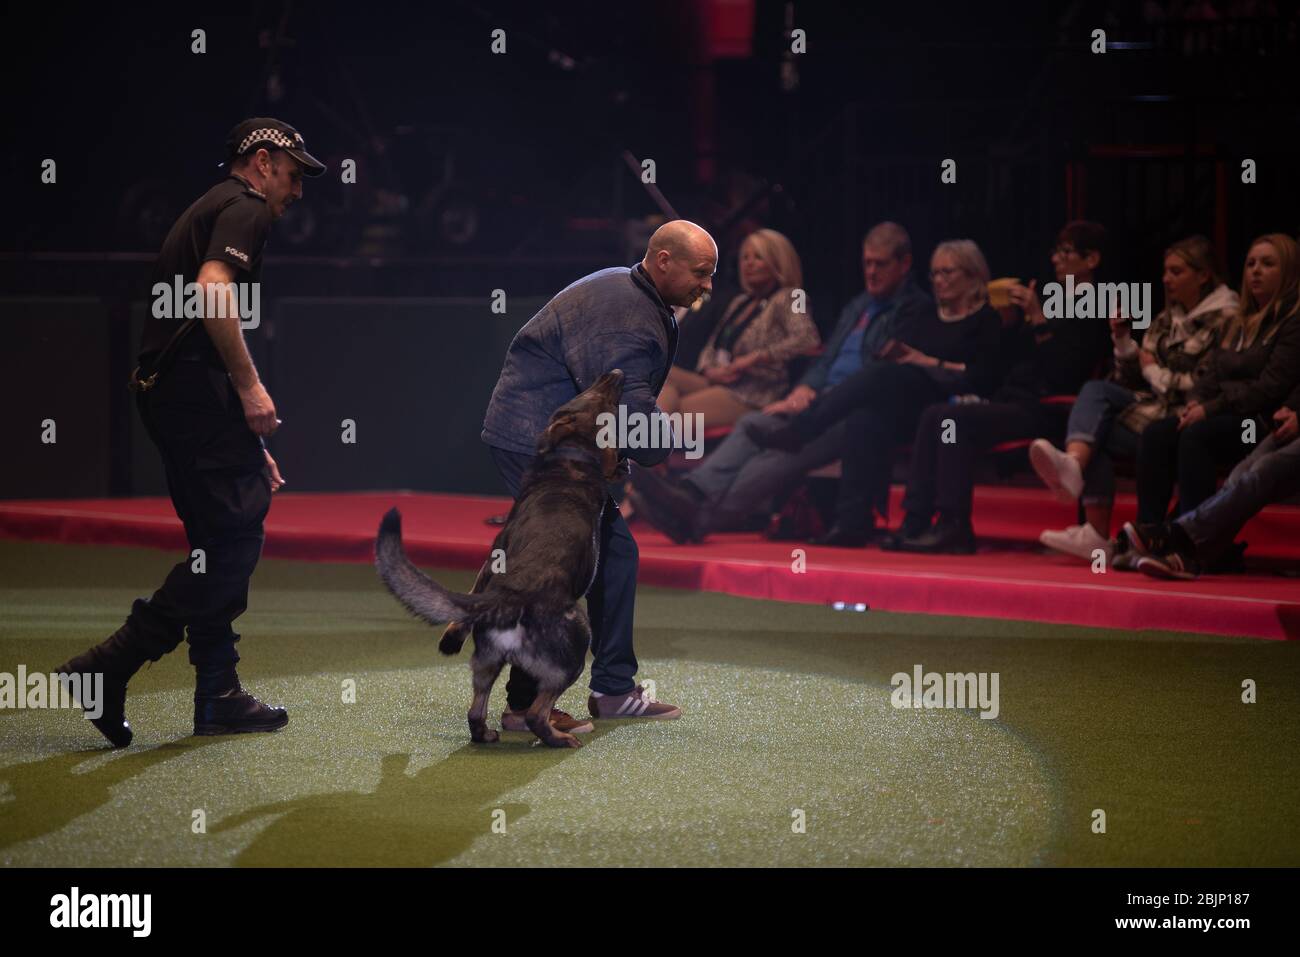 West Midlands Police Dogs displaying their skills in the Resorts World Arena on the 5th March 2020 Stock Photo